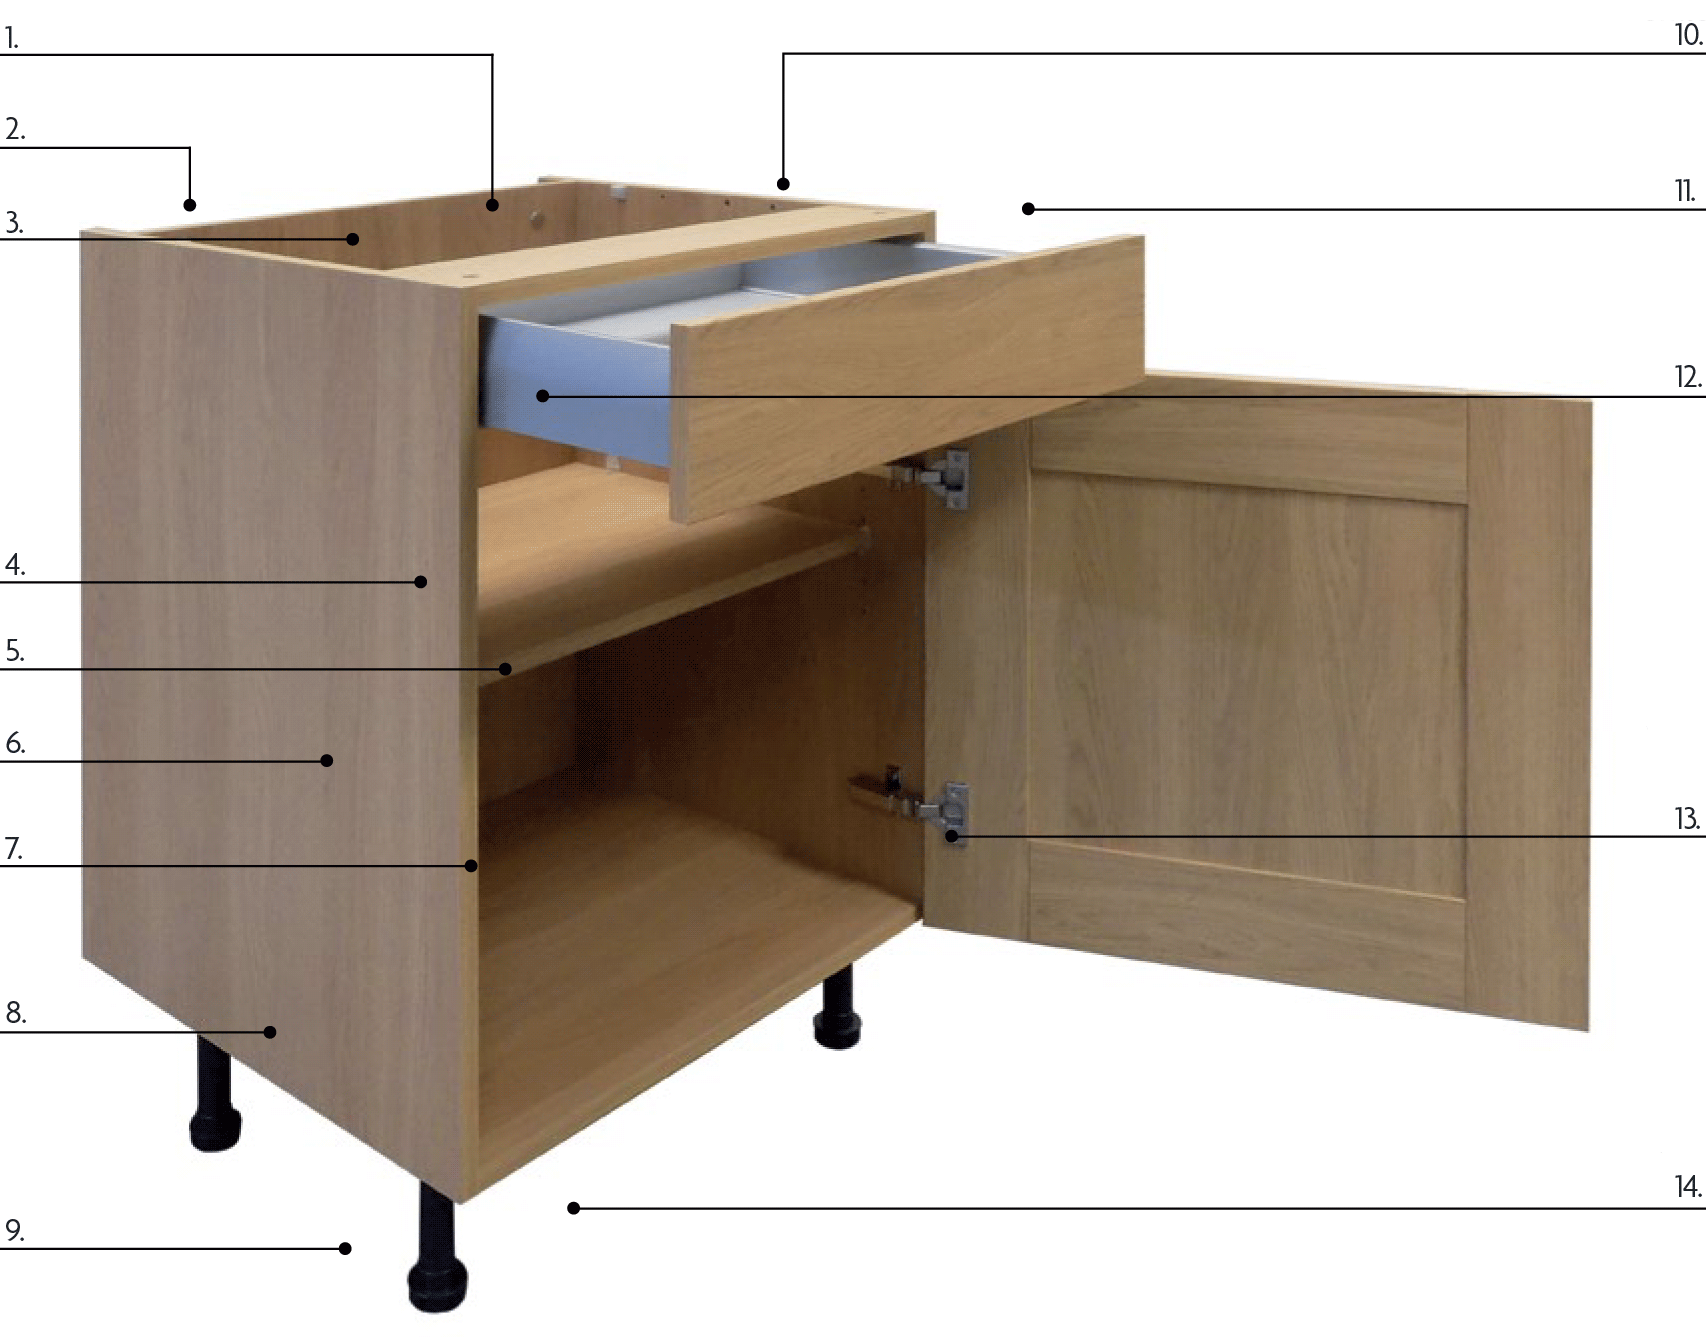 Flat -pack -kitchen -cabinets